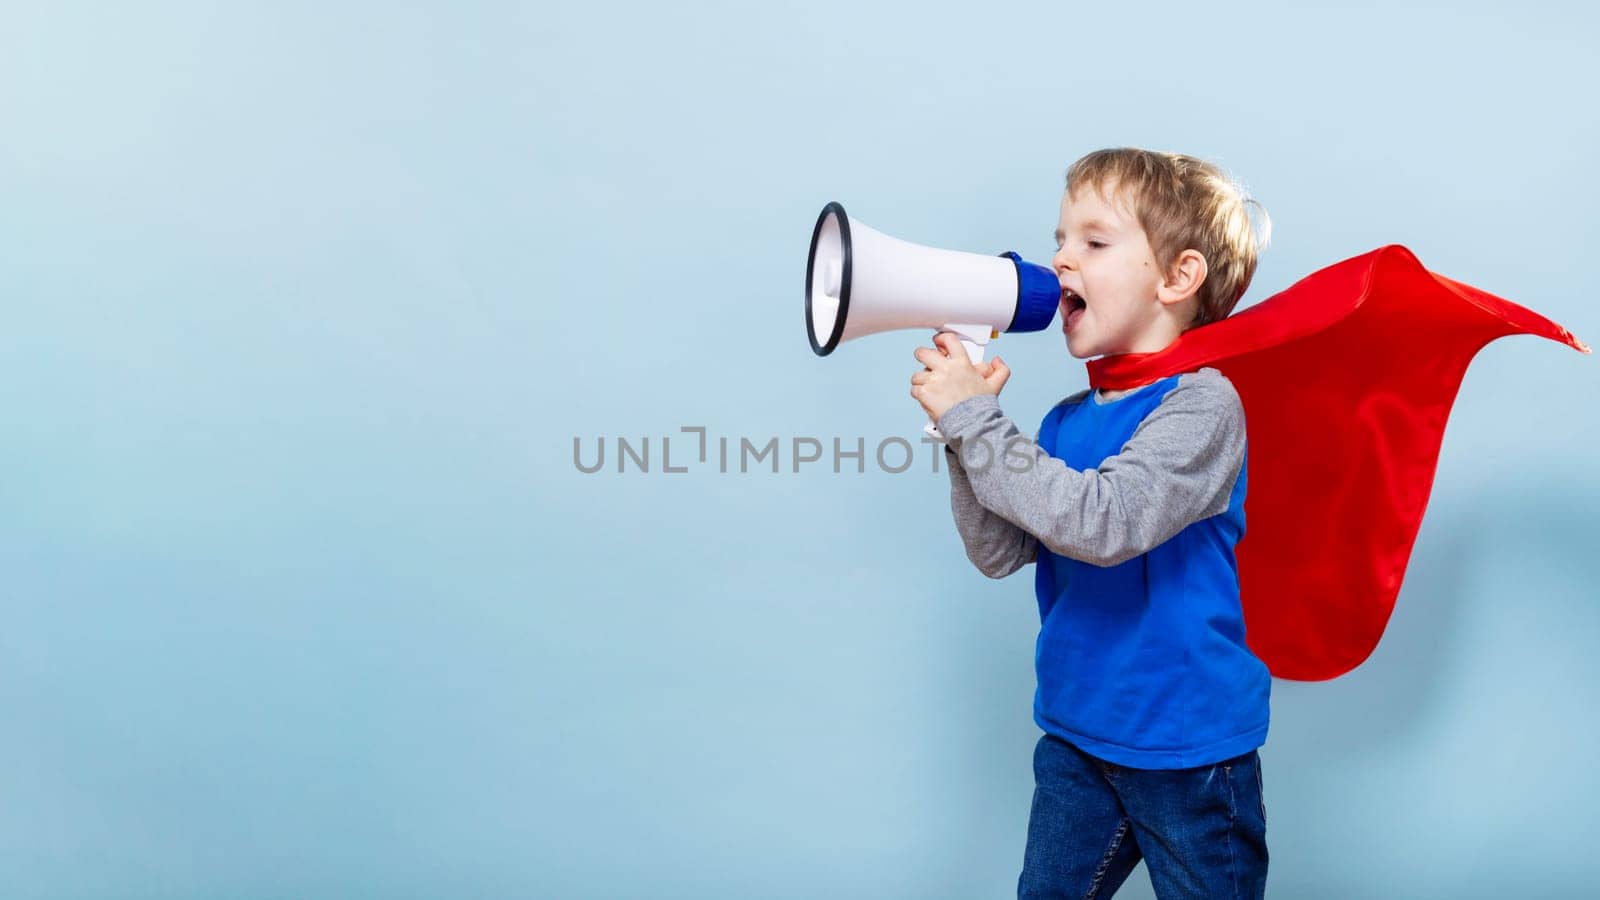 Boy with red cape shouting into megaphone, blue background. Studio child portrait. Leadership and communication concept. Design for banner, poster, card.